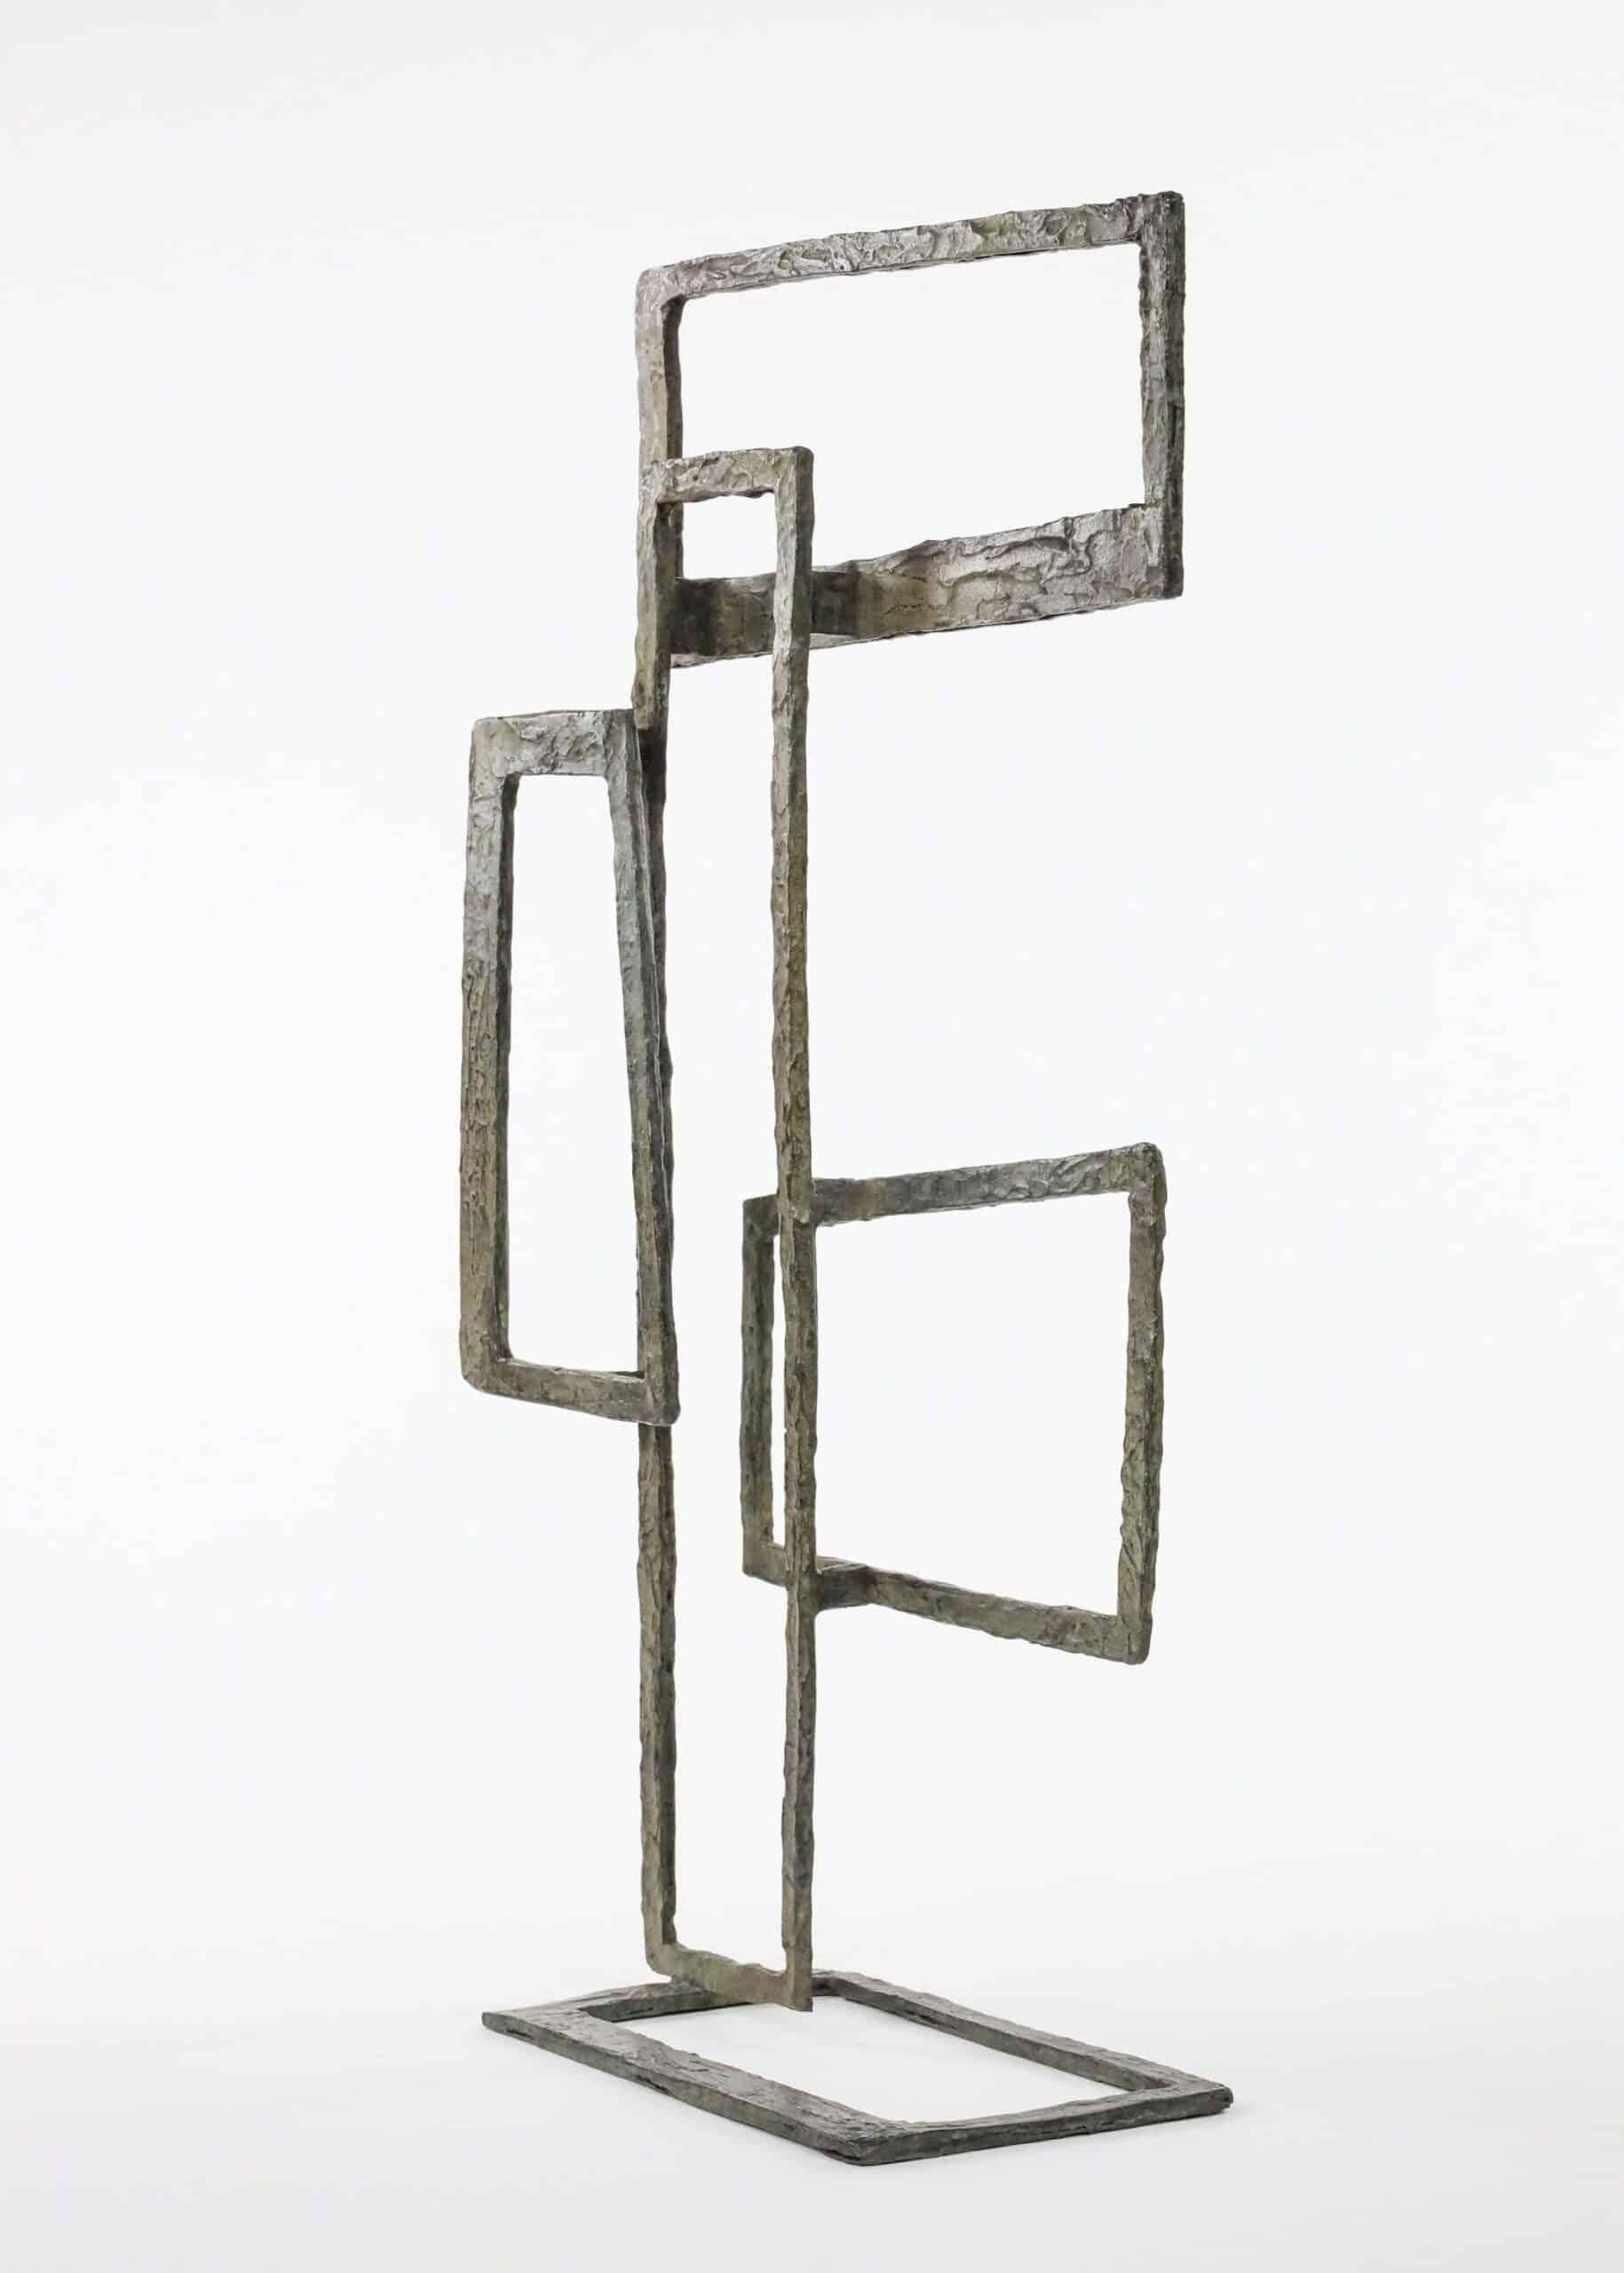 Composition IV by Delphine Brabant - Abstract geometric bronze sculpture For Sale 2